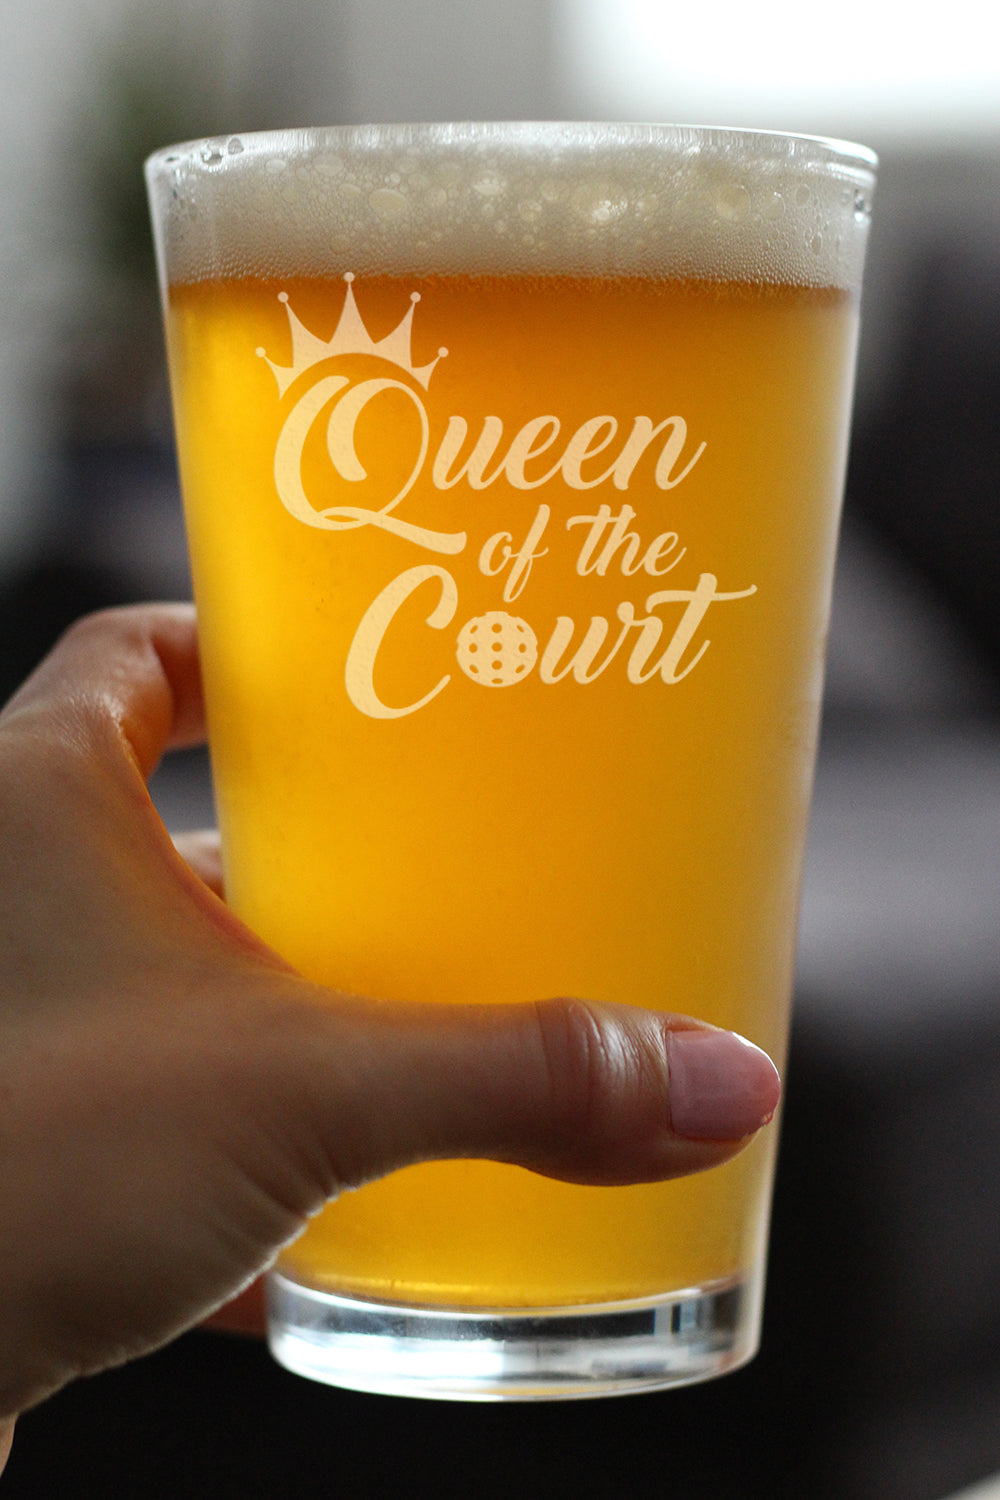 Queen of the Court - Funny Pickleball Themed Decor and Gifts - 16 Ounce Pint Glass